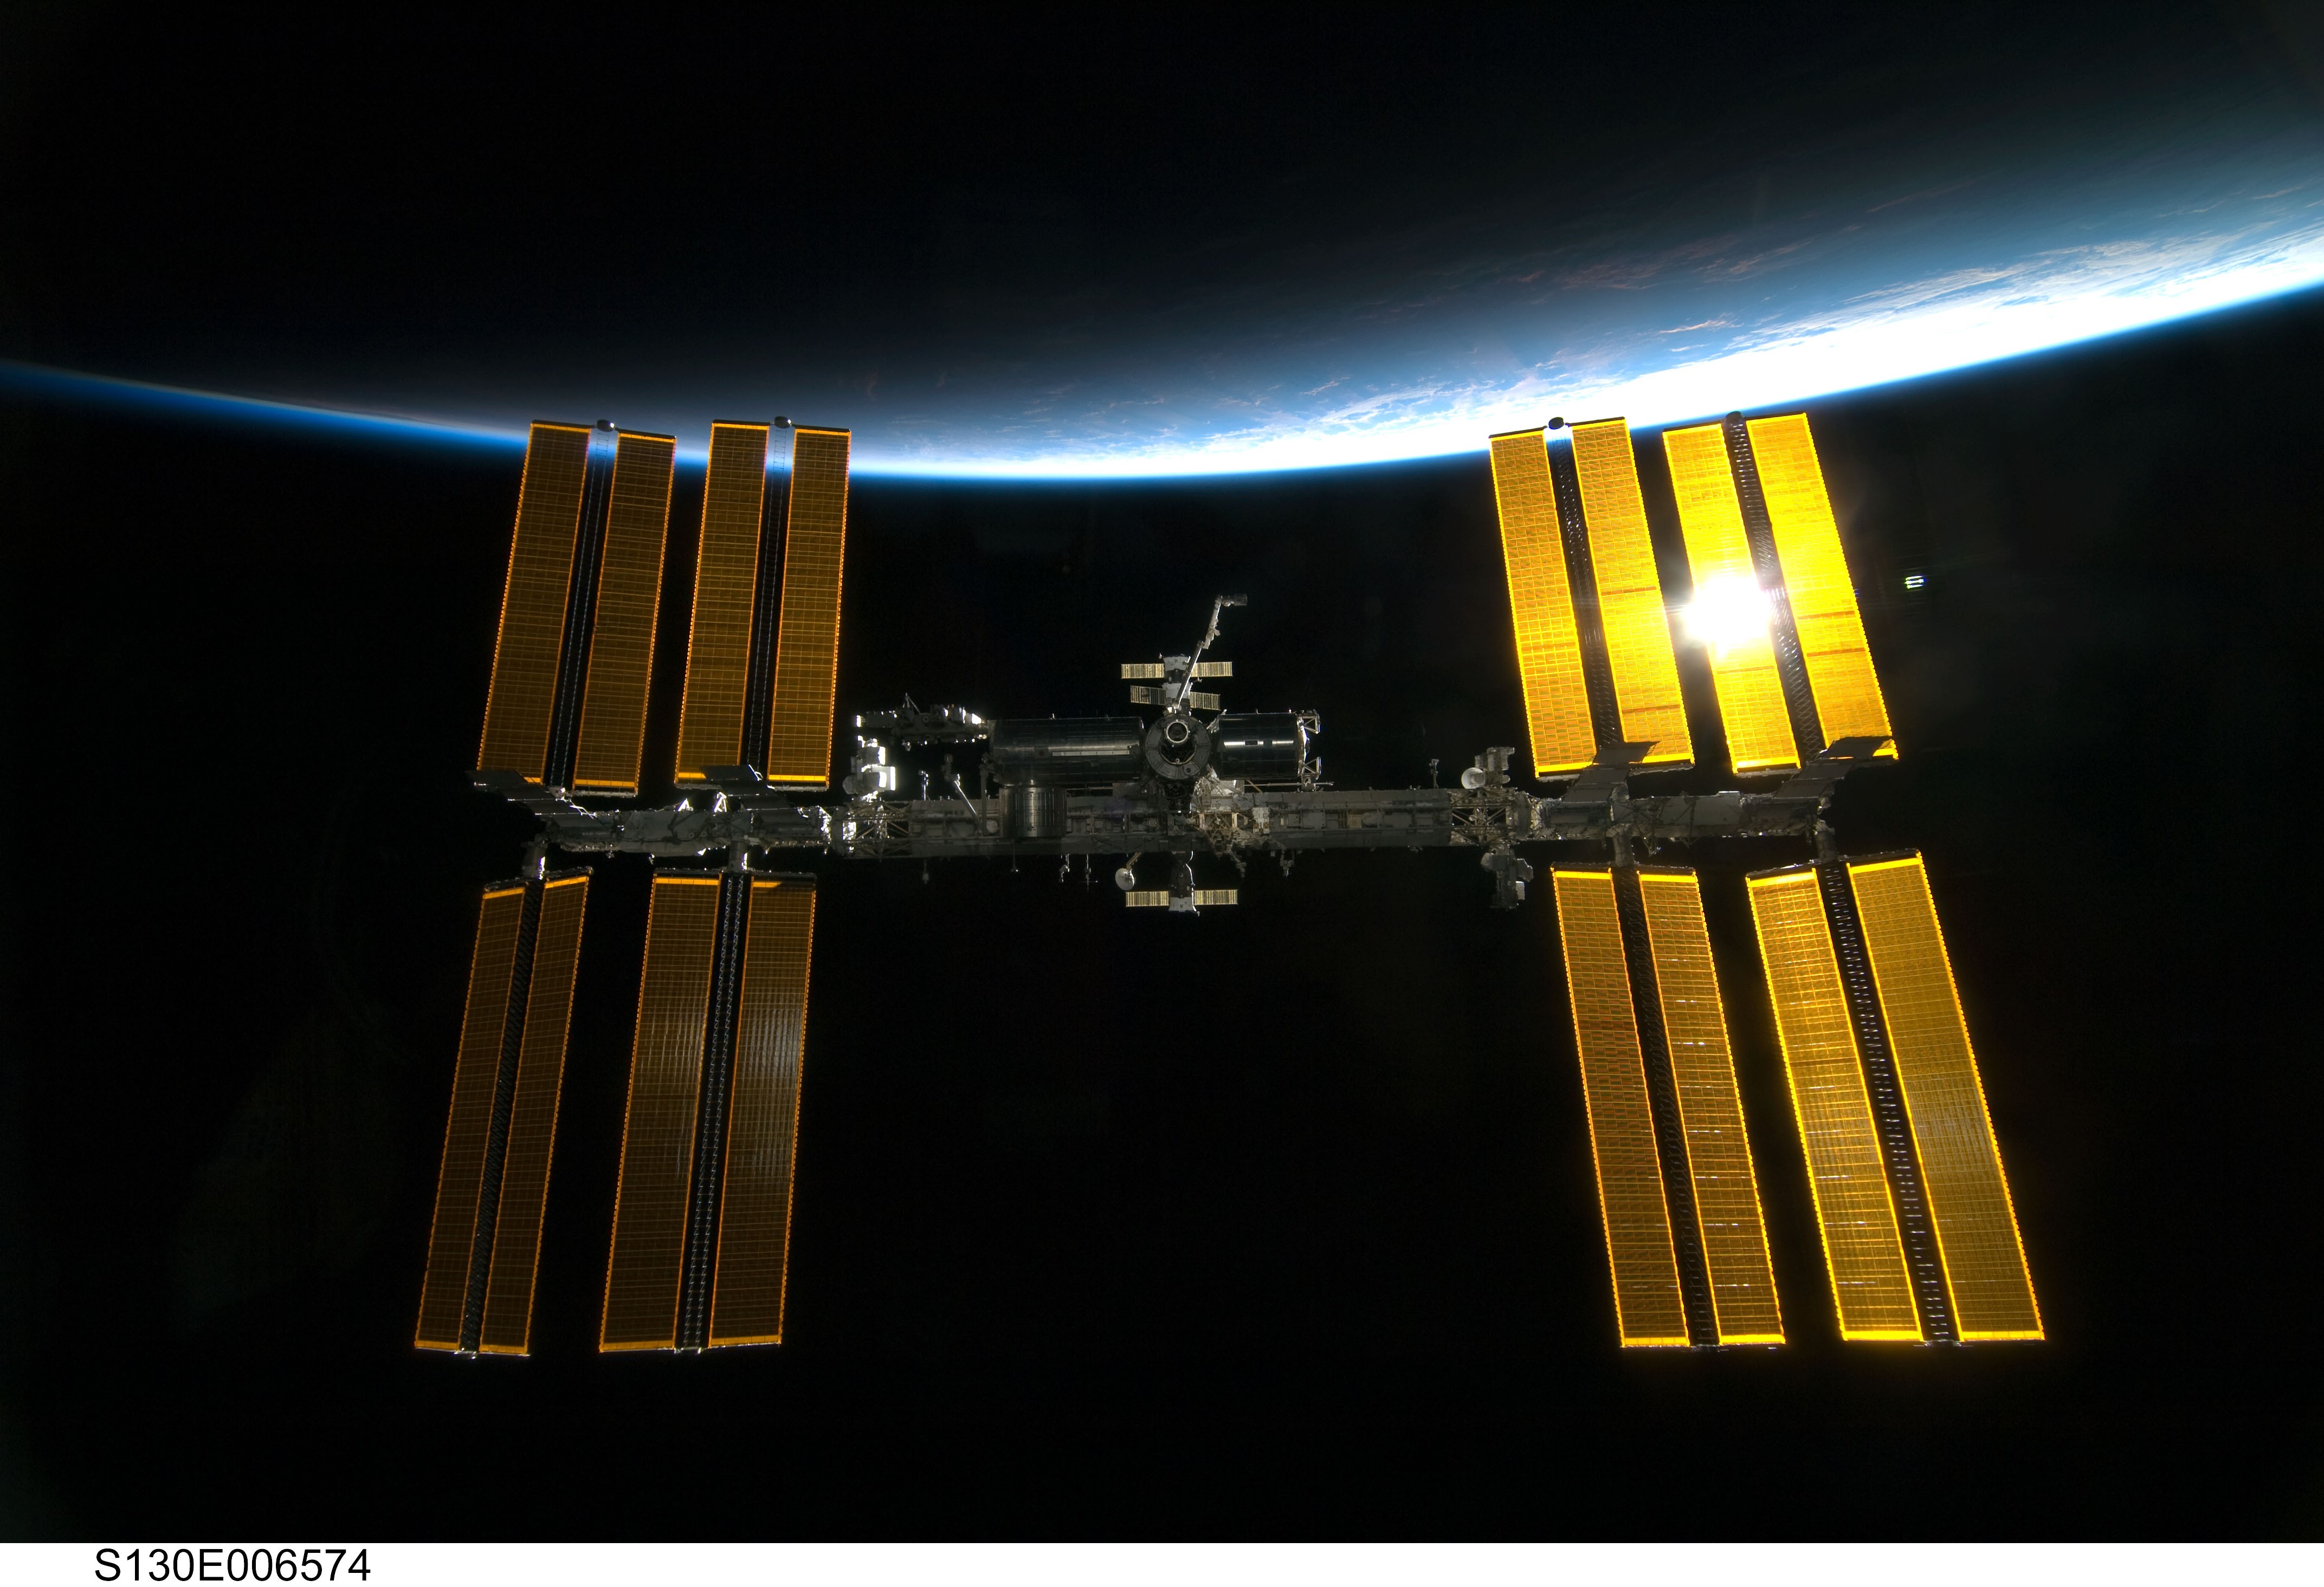 Space Space Station ISS 4288x2929